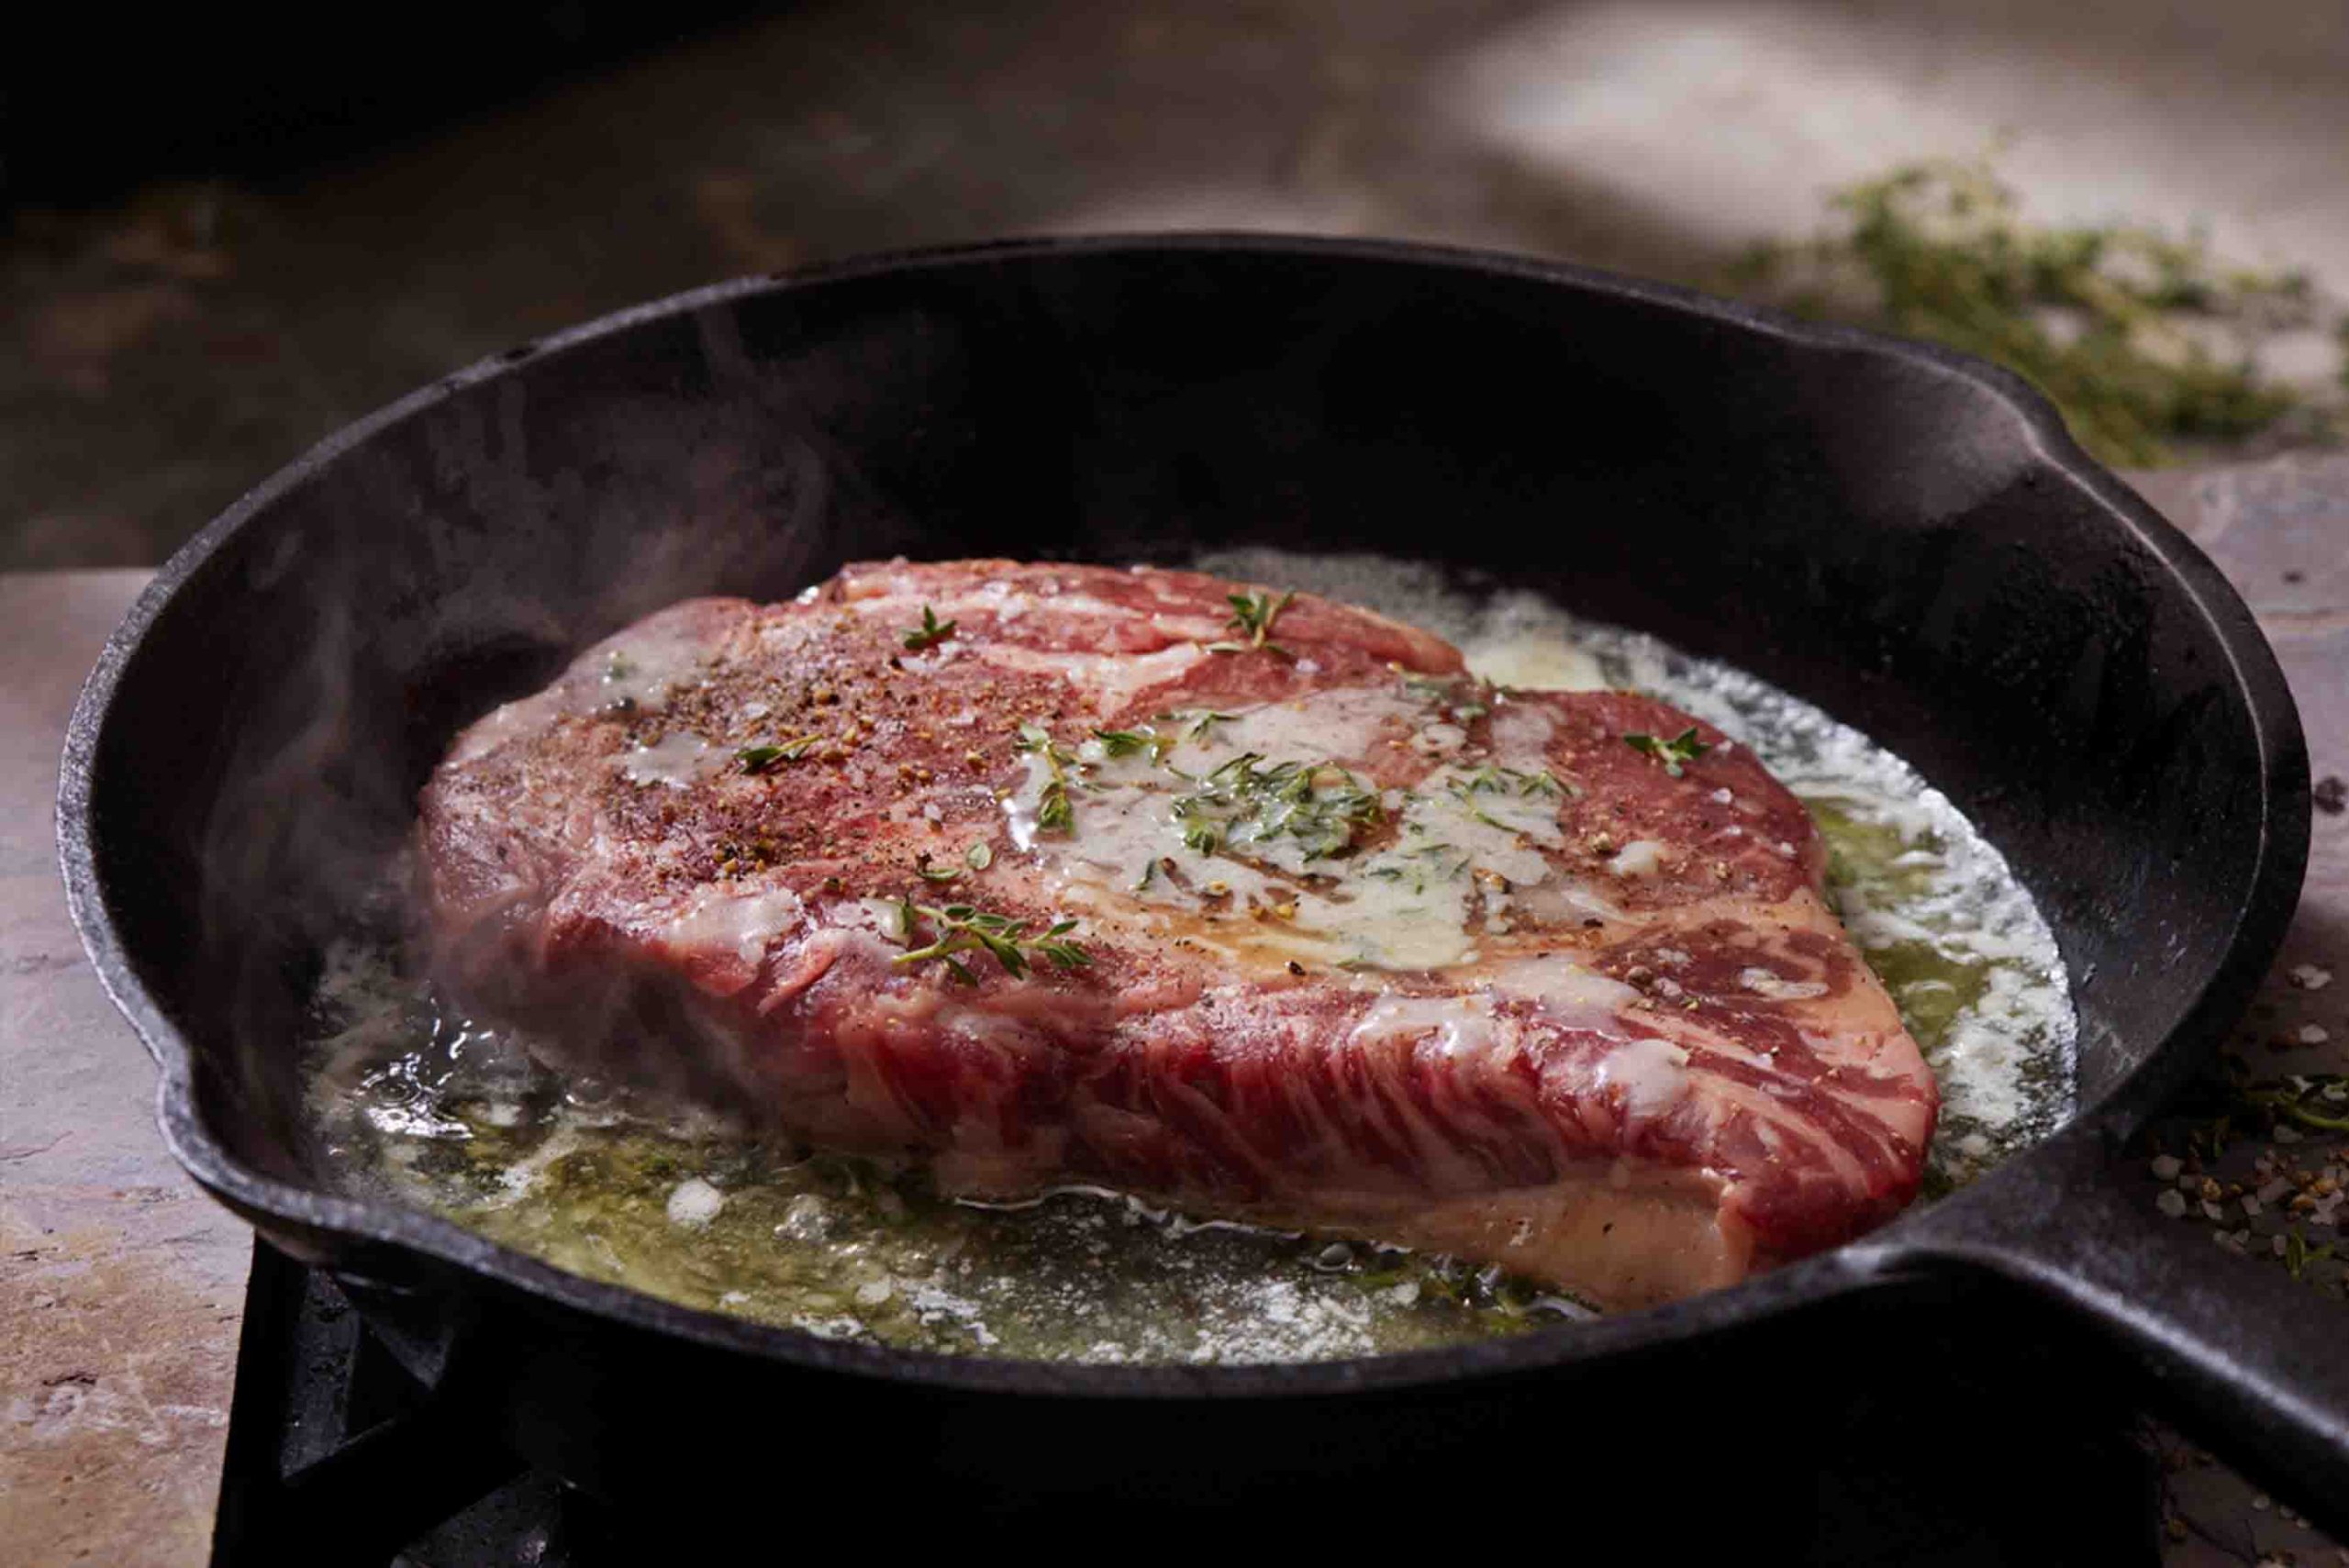 Your food deserves to be prepared in the very best cookware available, cast iron is it.